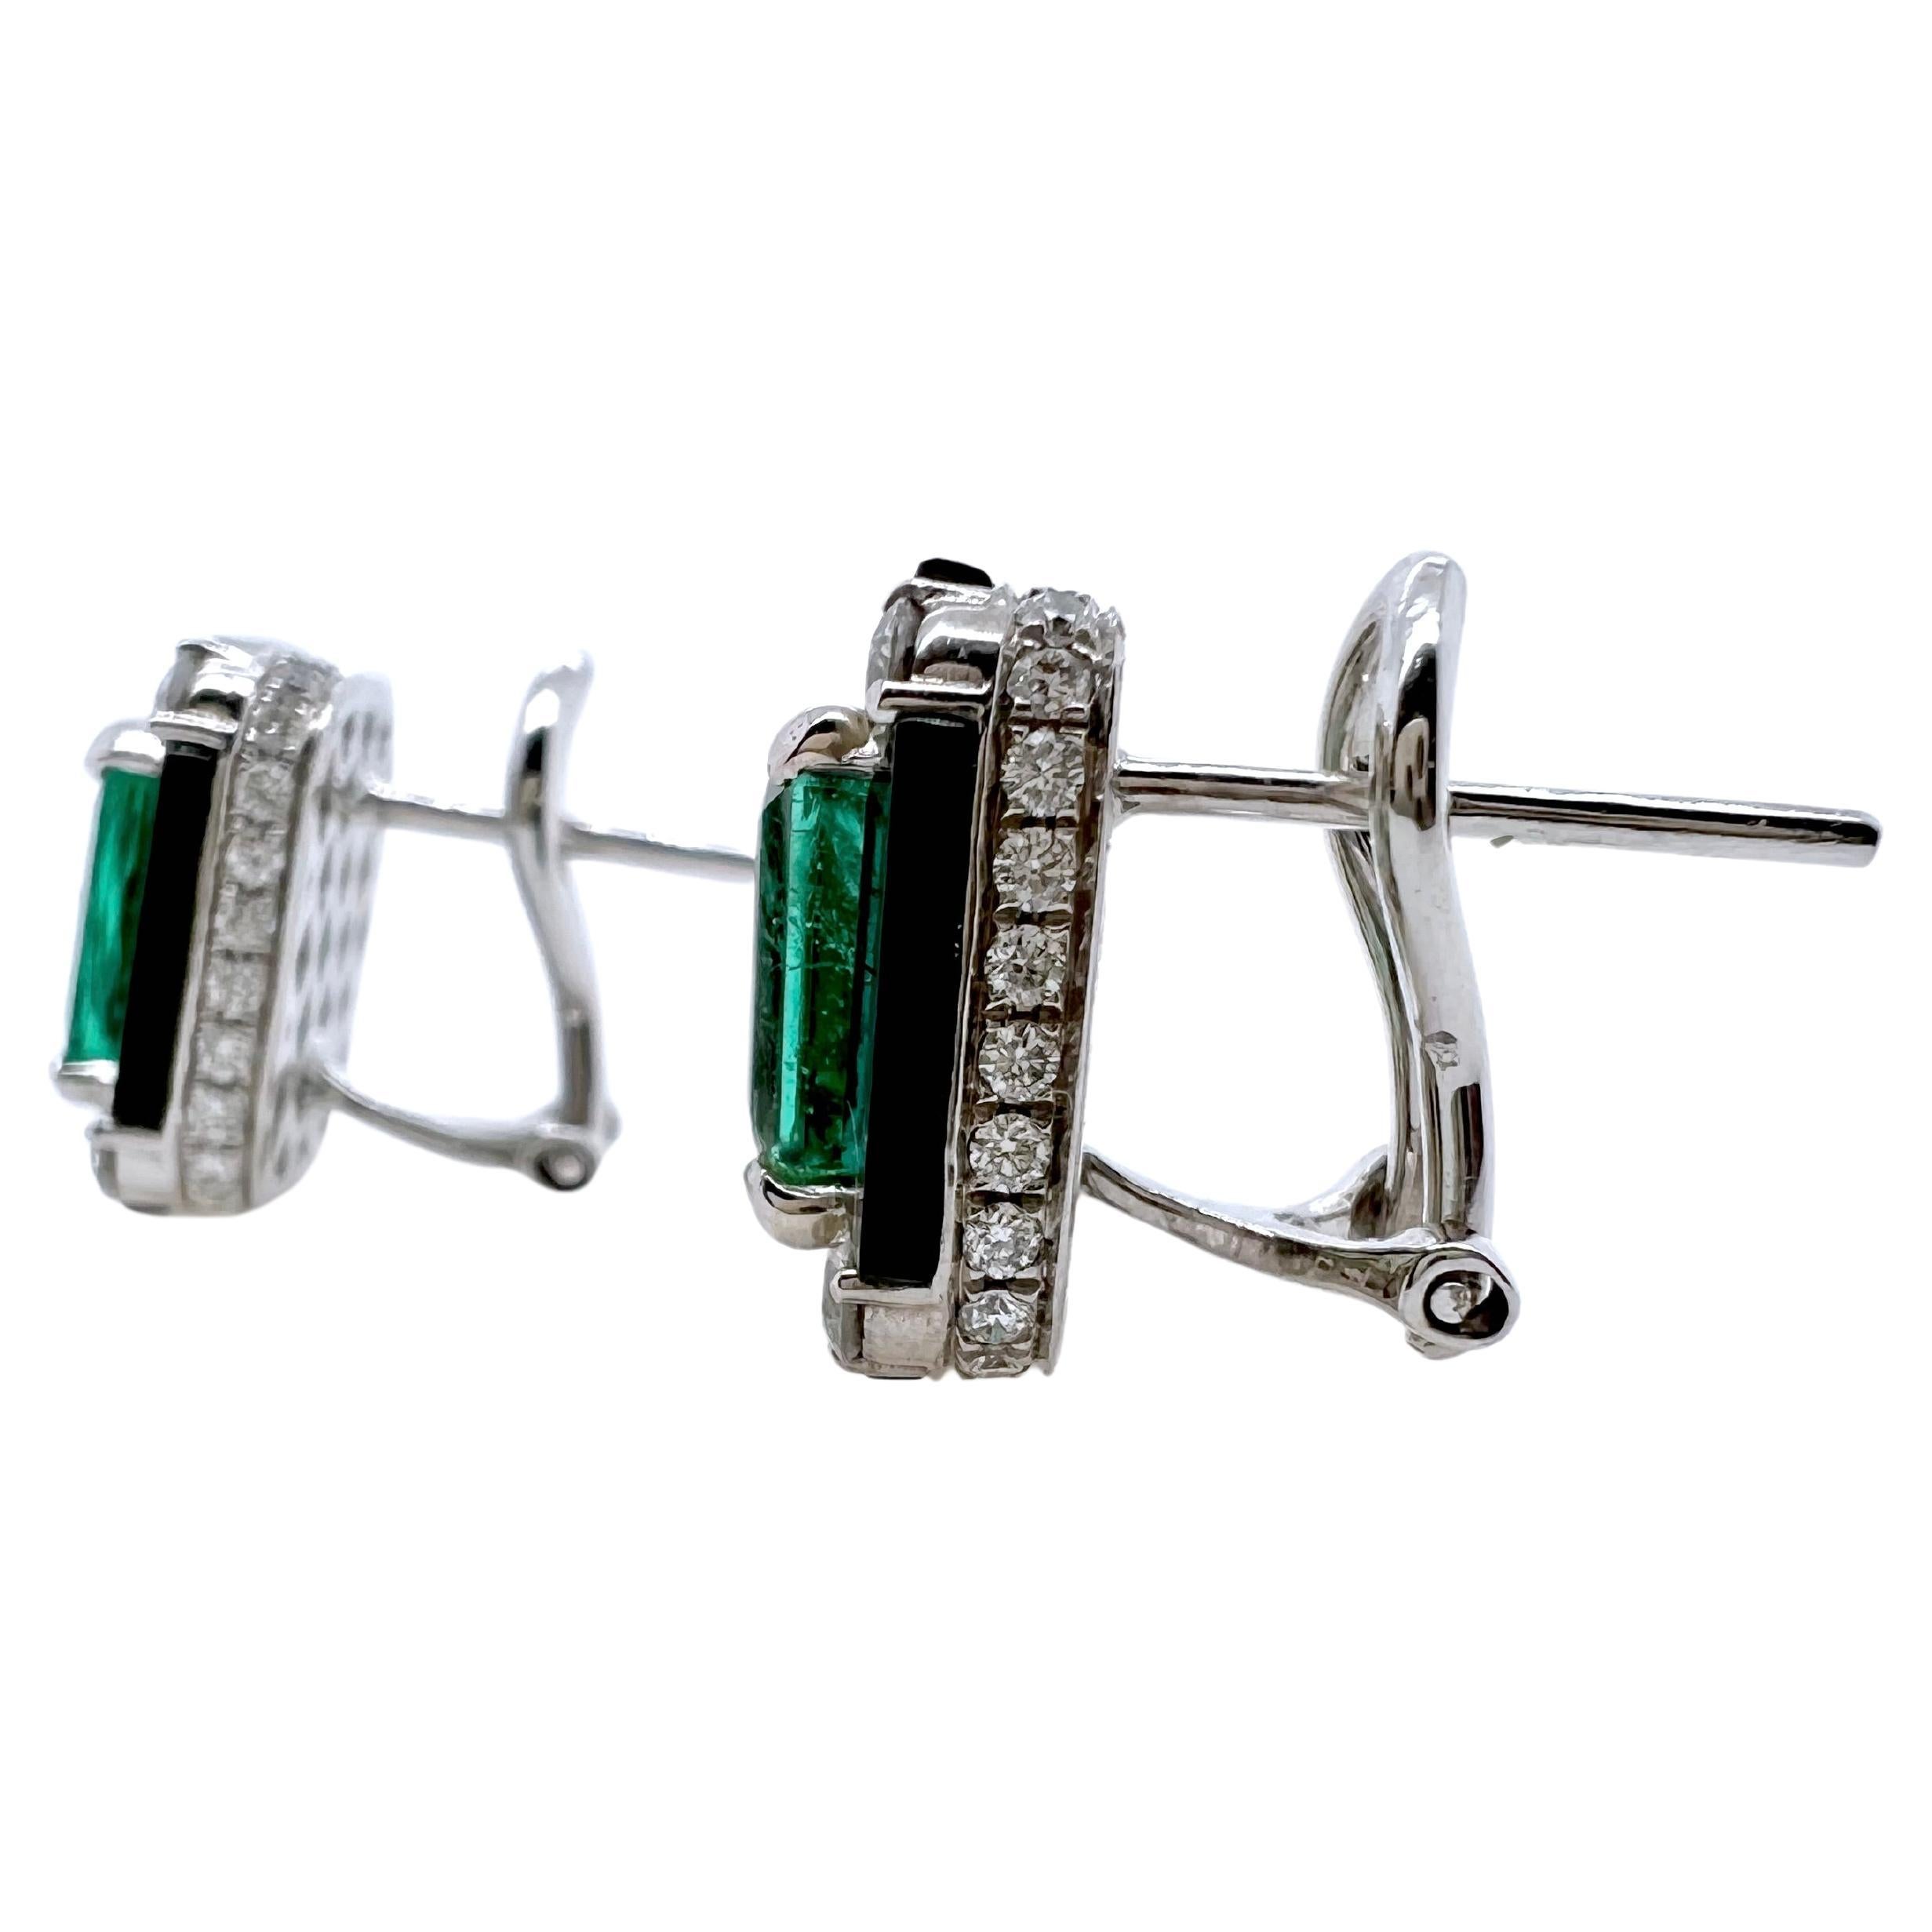 These stunning art deco looking earrings are amazing!  The custom cut black onyx surround the vibrant emeralds and have small pave' diamonds surround the 18k white gold frame.  The size is perfect for the smart casual look!  The contrast of the